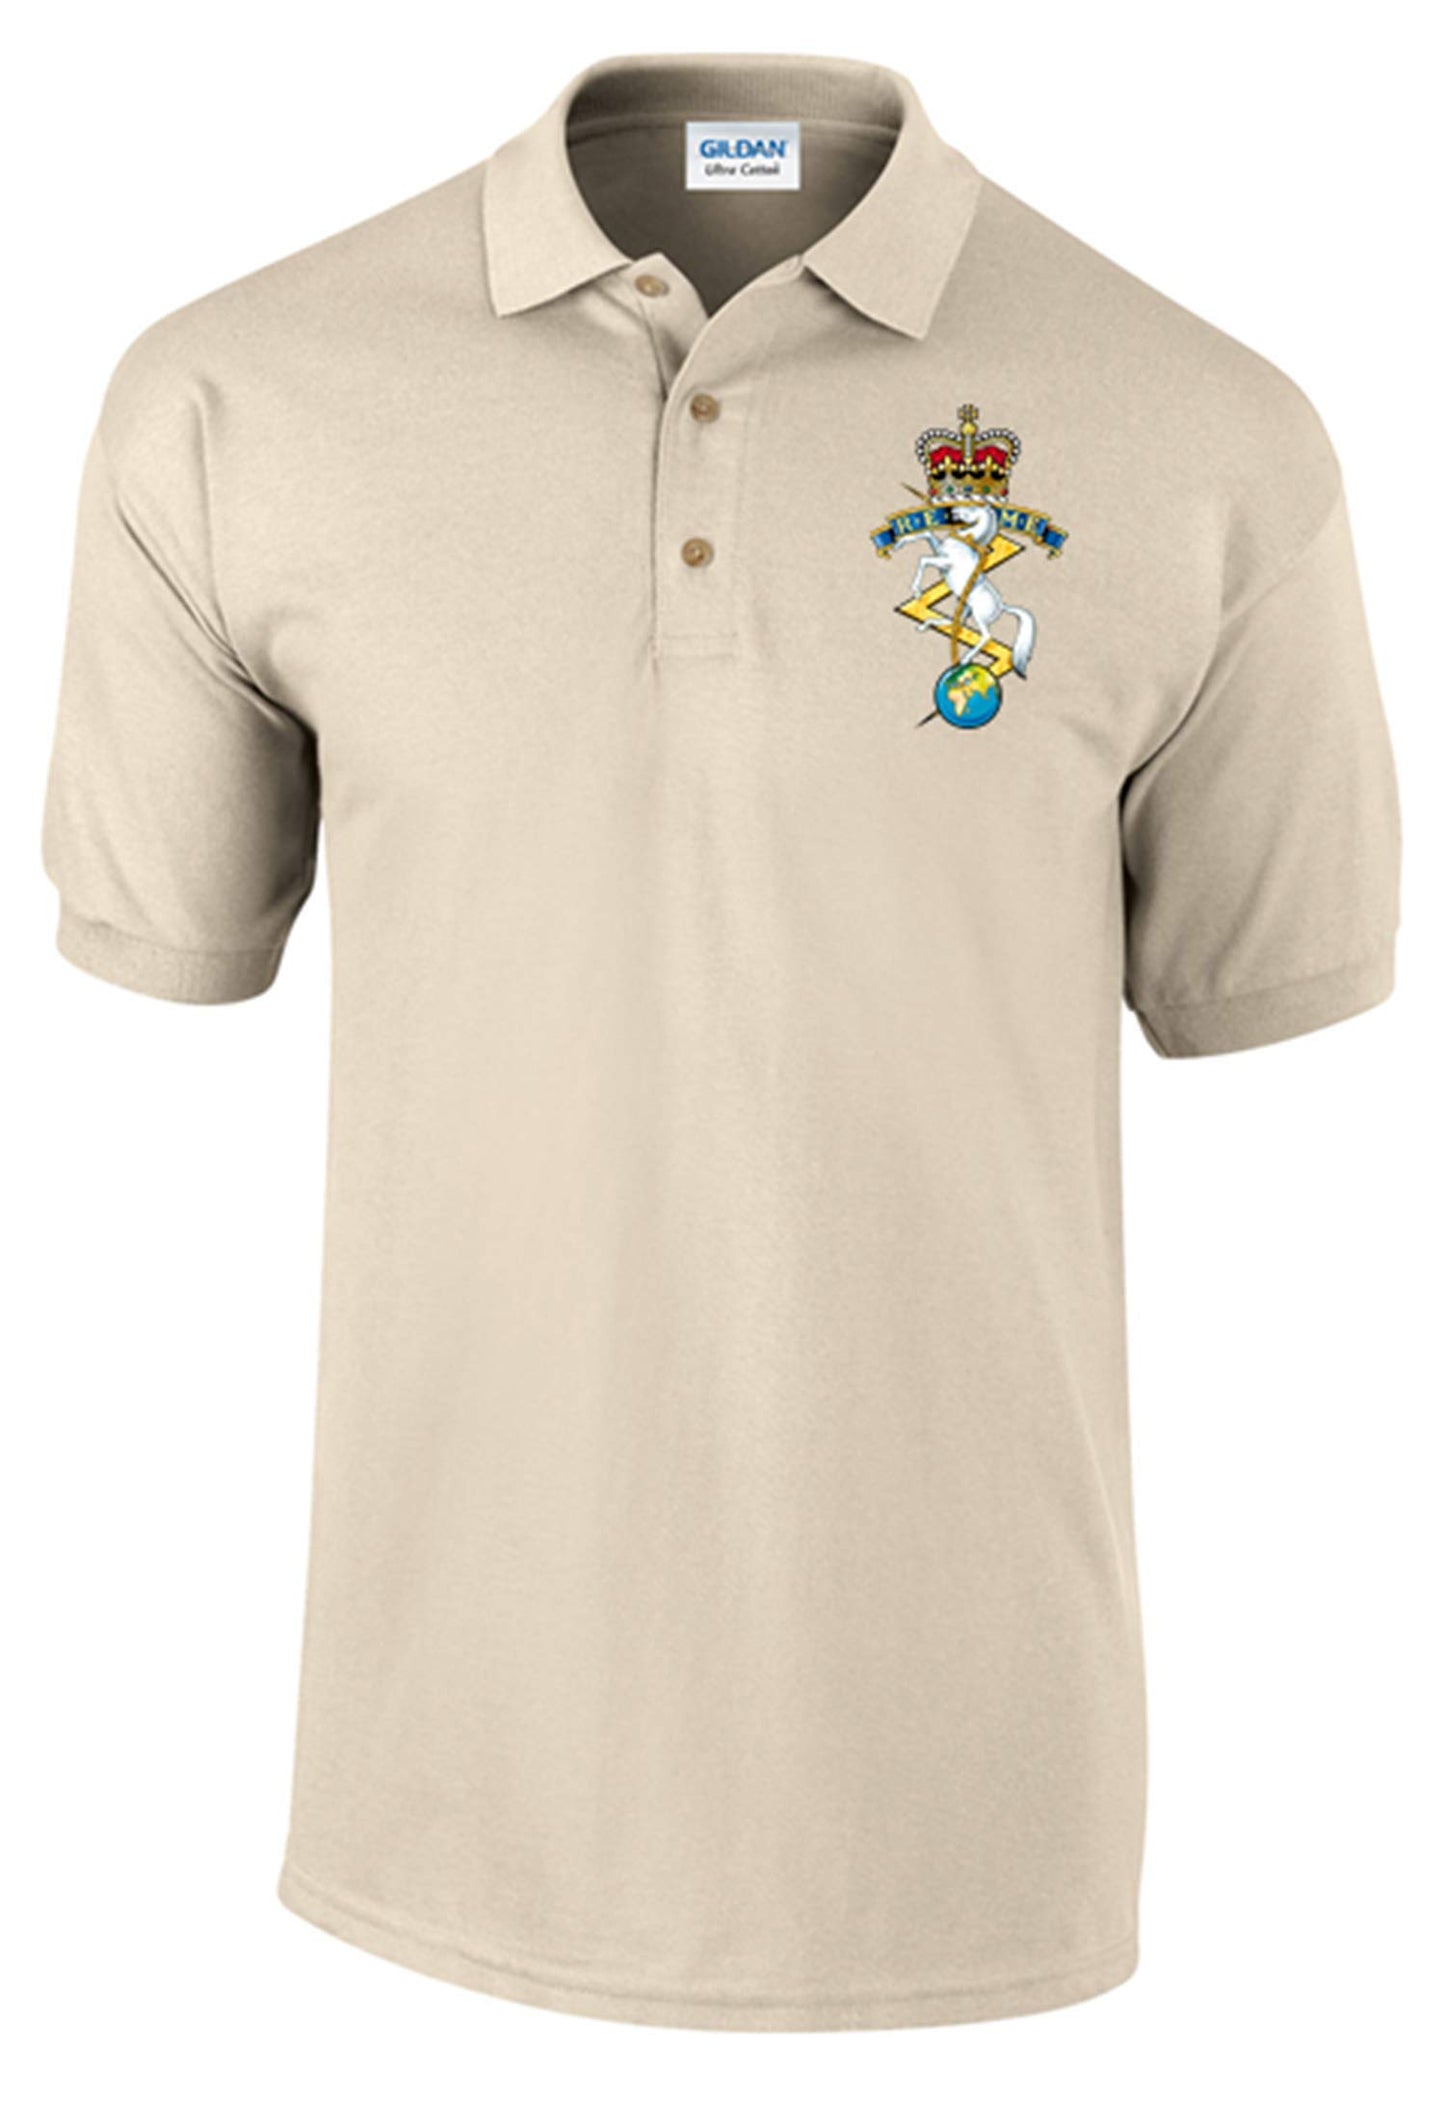 REME Polo Shirt Official MOD Approved Merchandise - Army 1157 kit Sand / XXL Army 1157 Kit